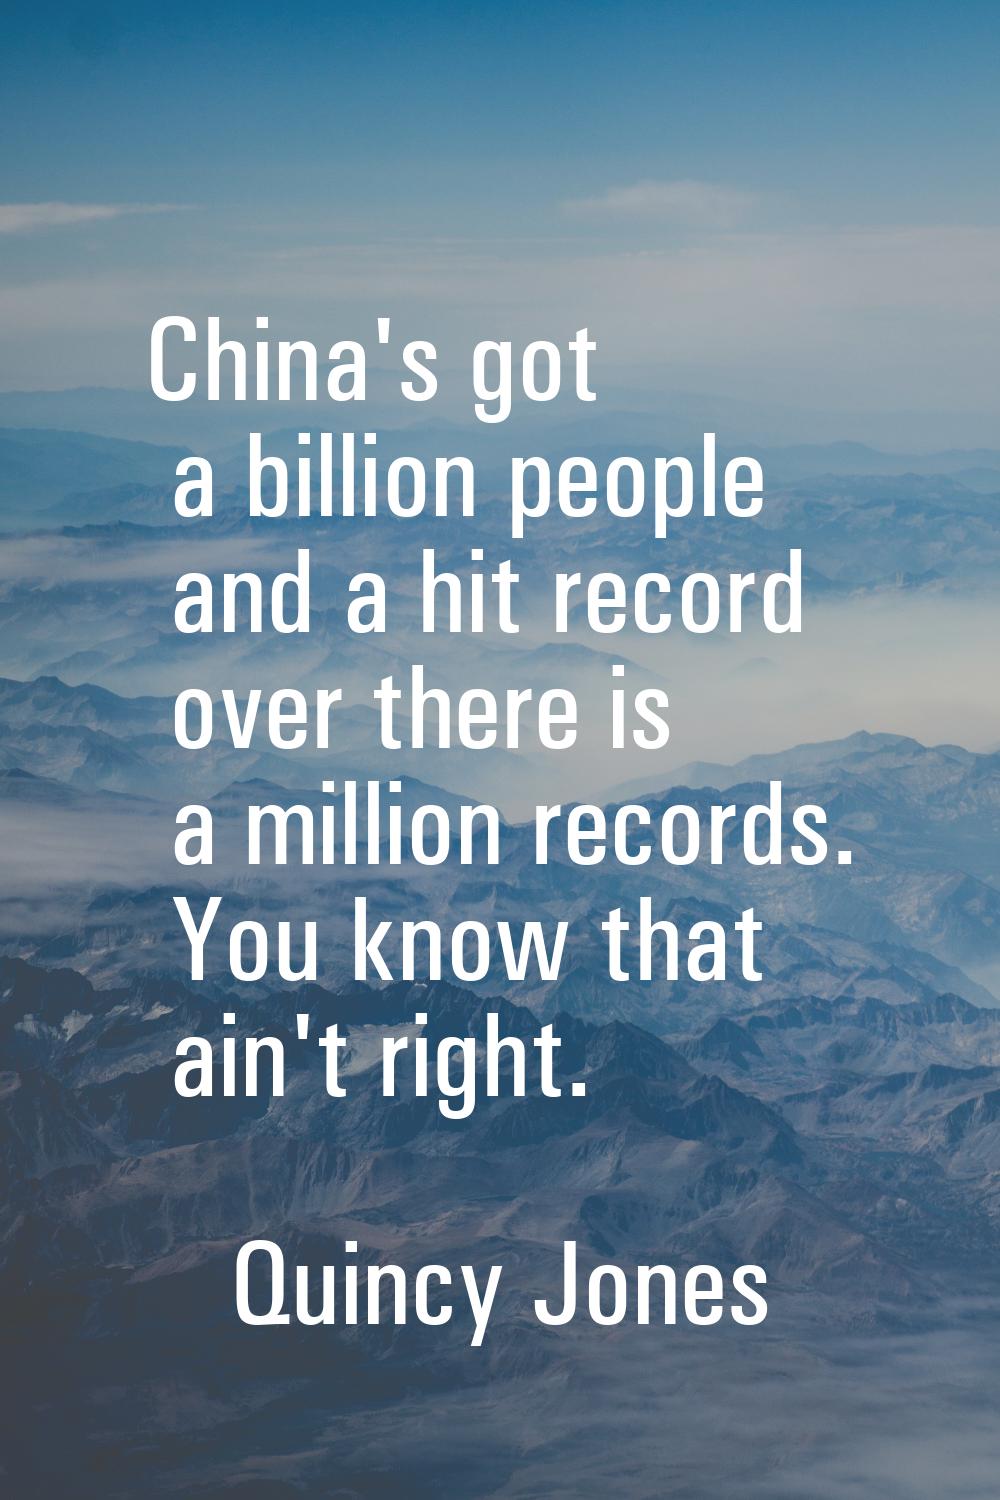 China's got a billion people and a hit record over there is a million records. You know that ain't 